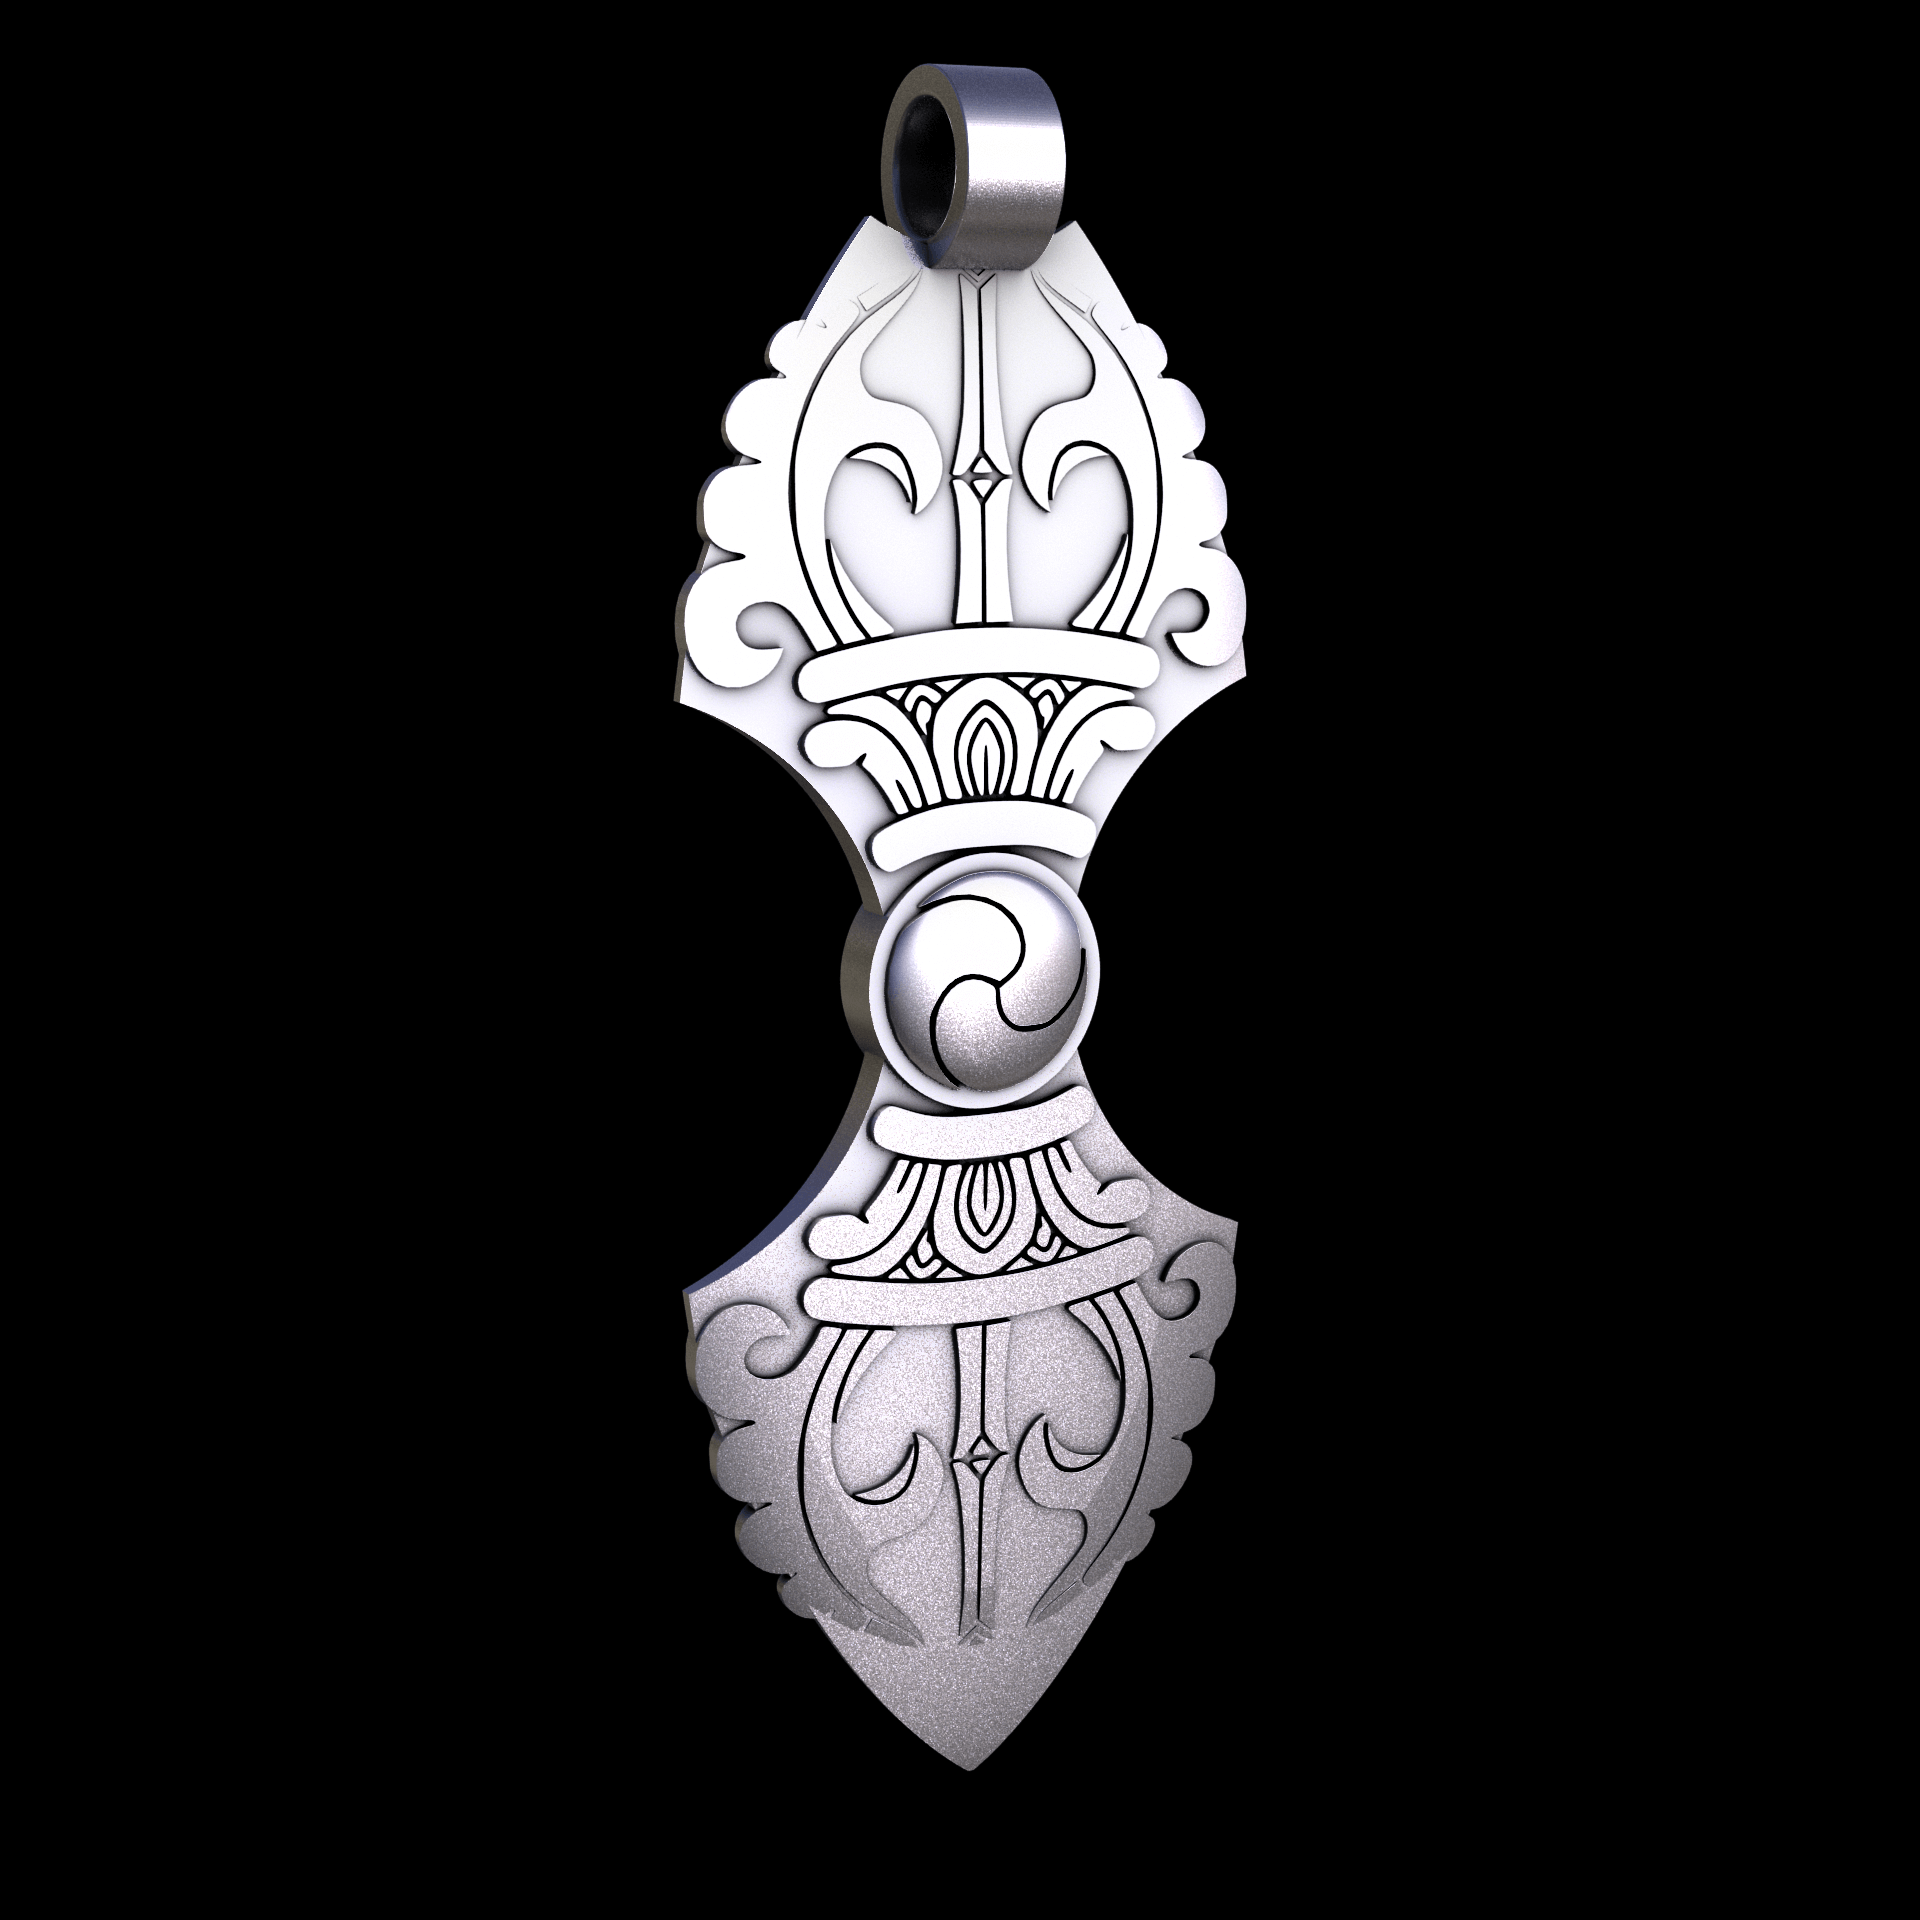 Sterling silver manufactured using wax casting, and lightly polished with a rough matte surface finish.